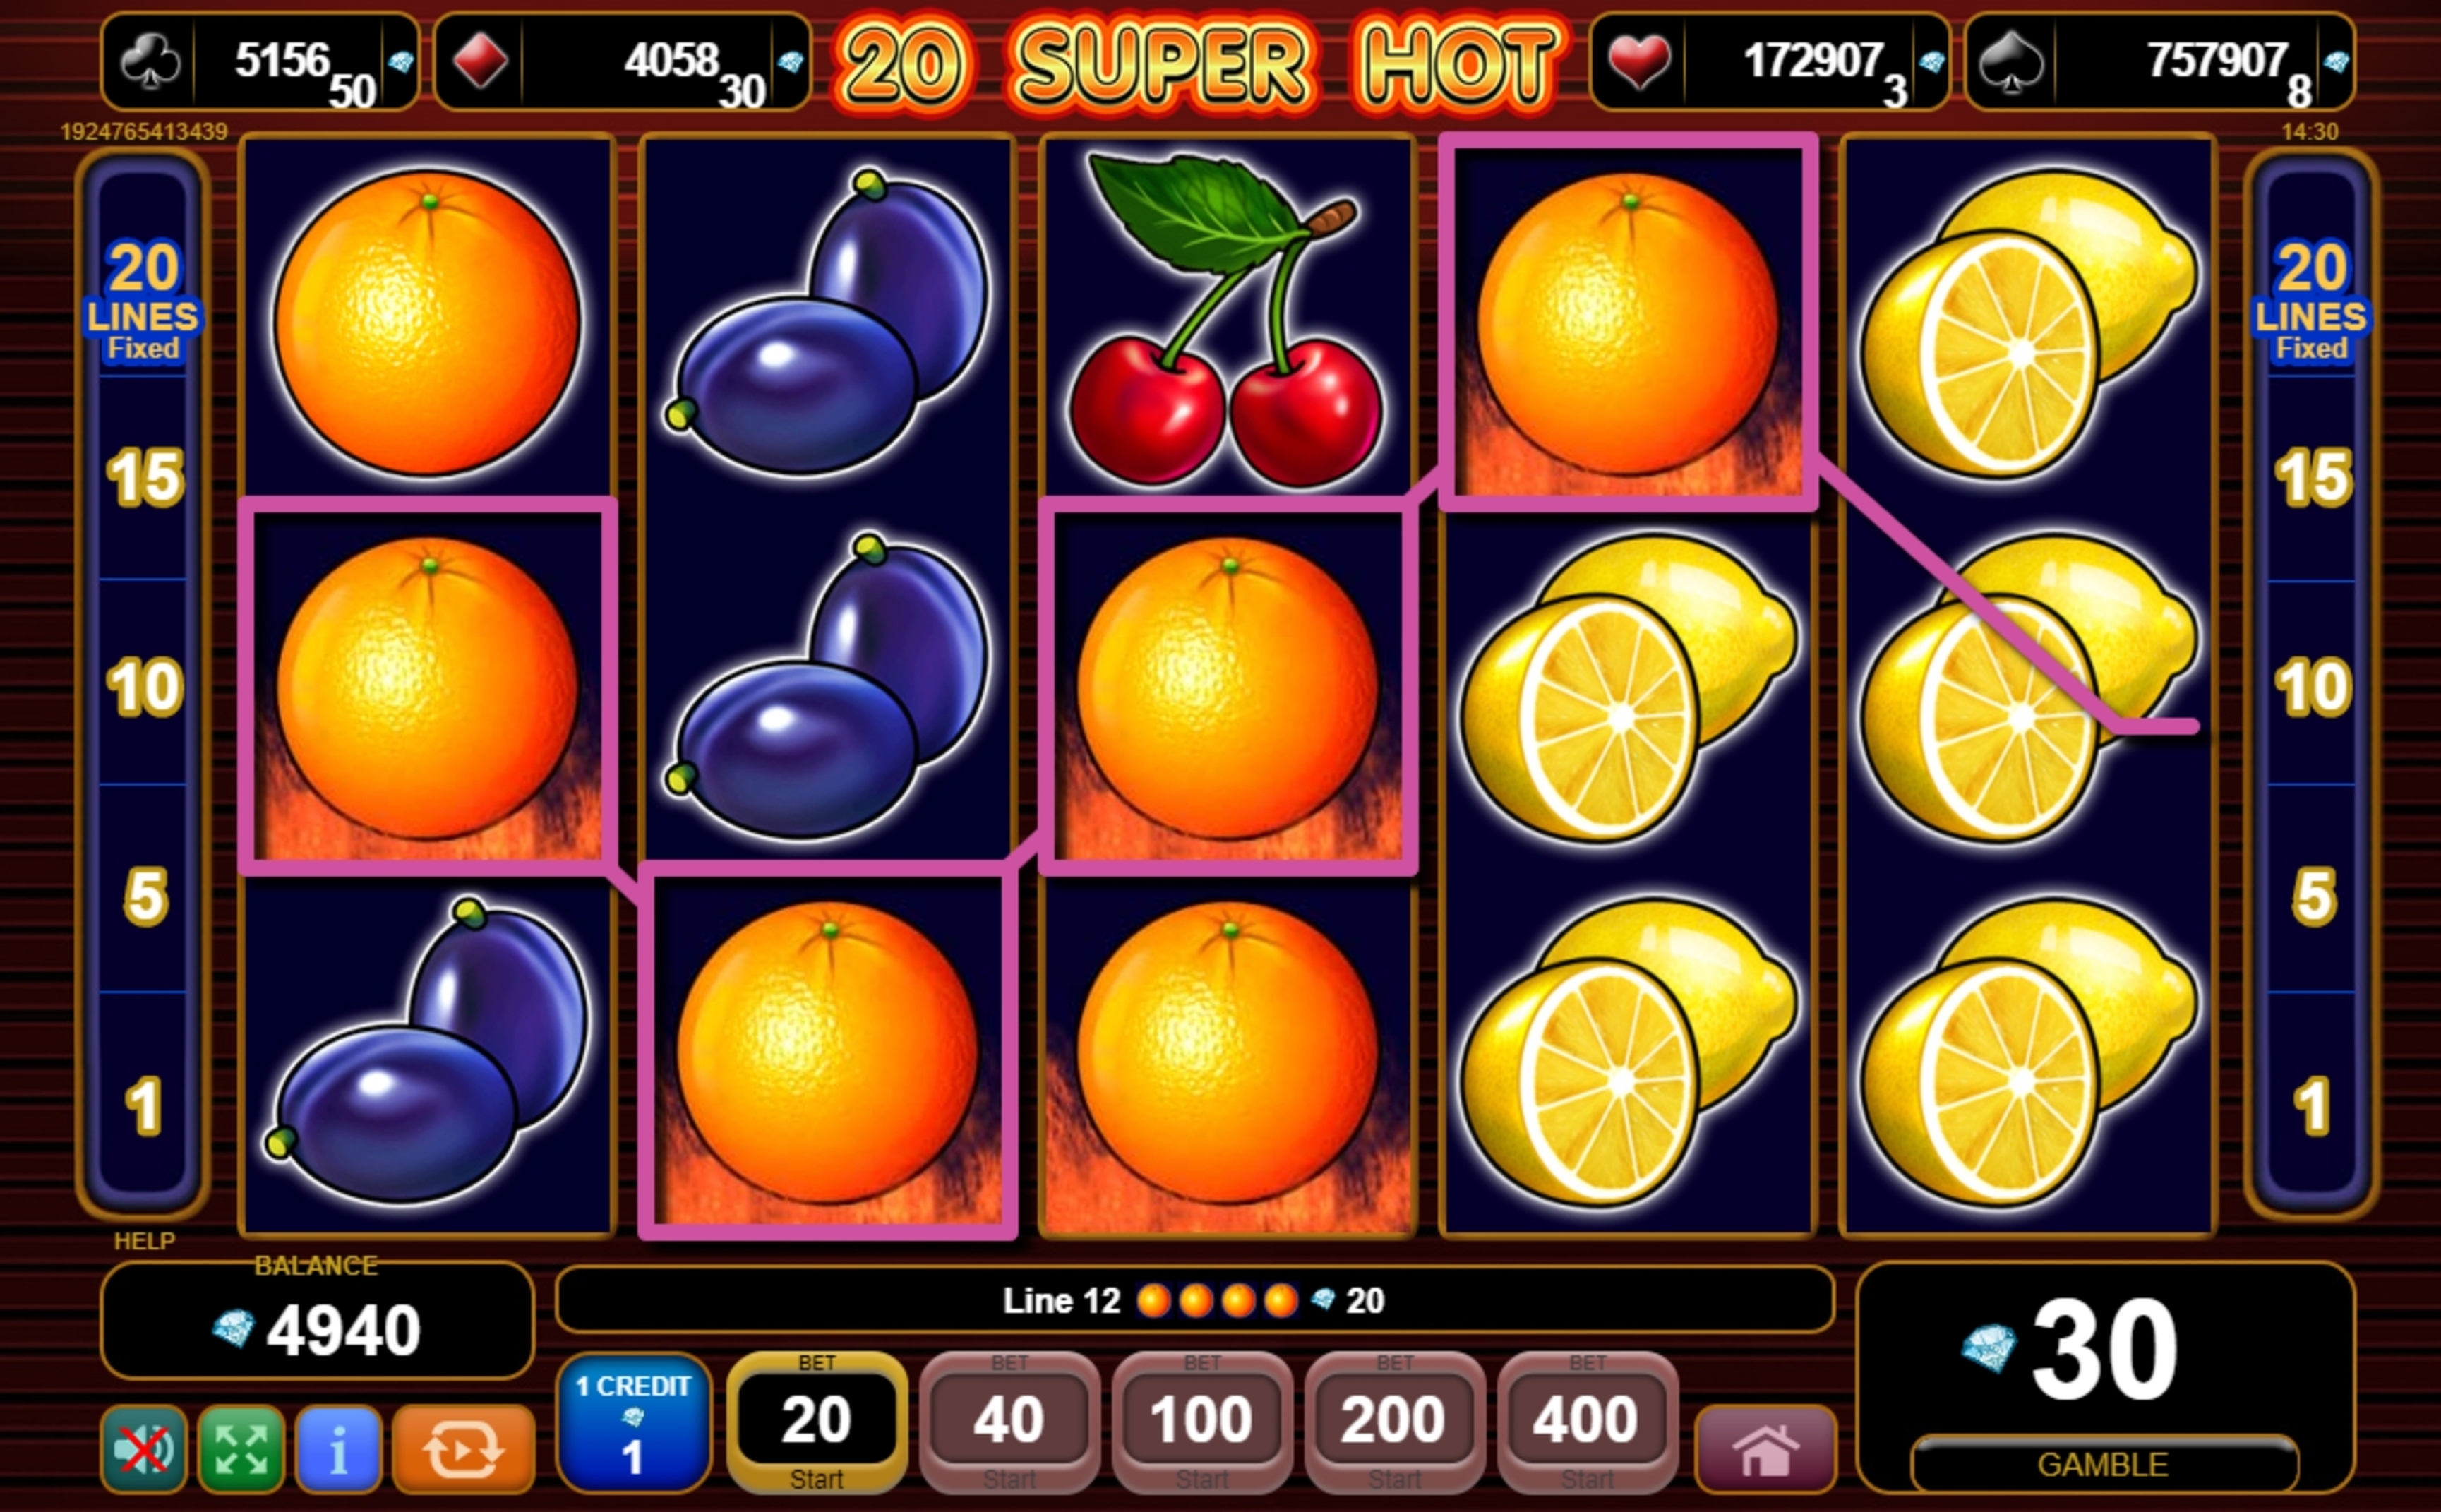 Win Money in 20 Super Hot Free Slot Game by EGT